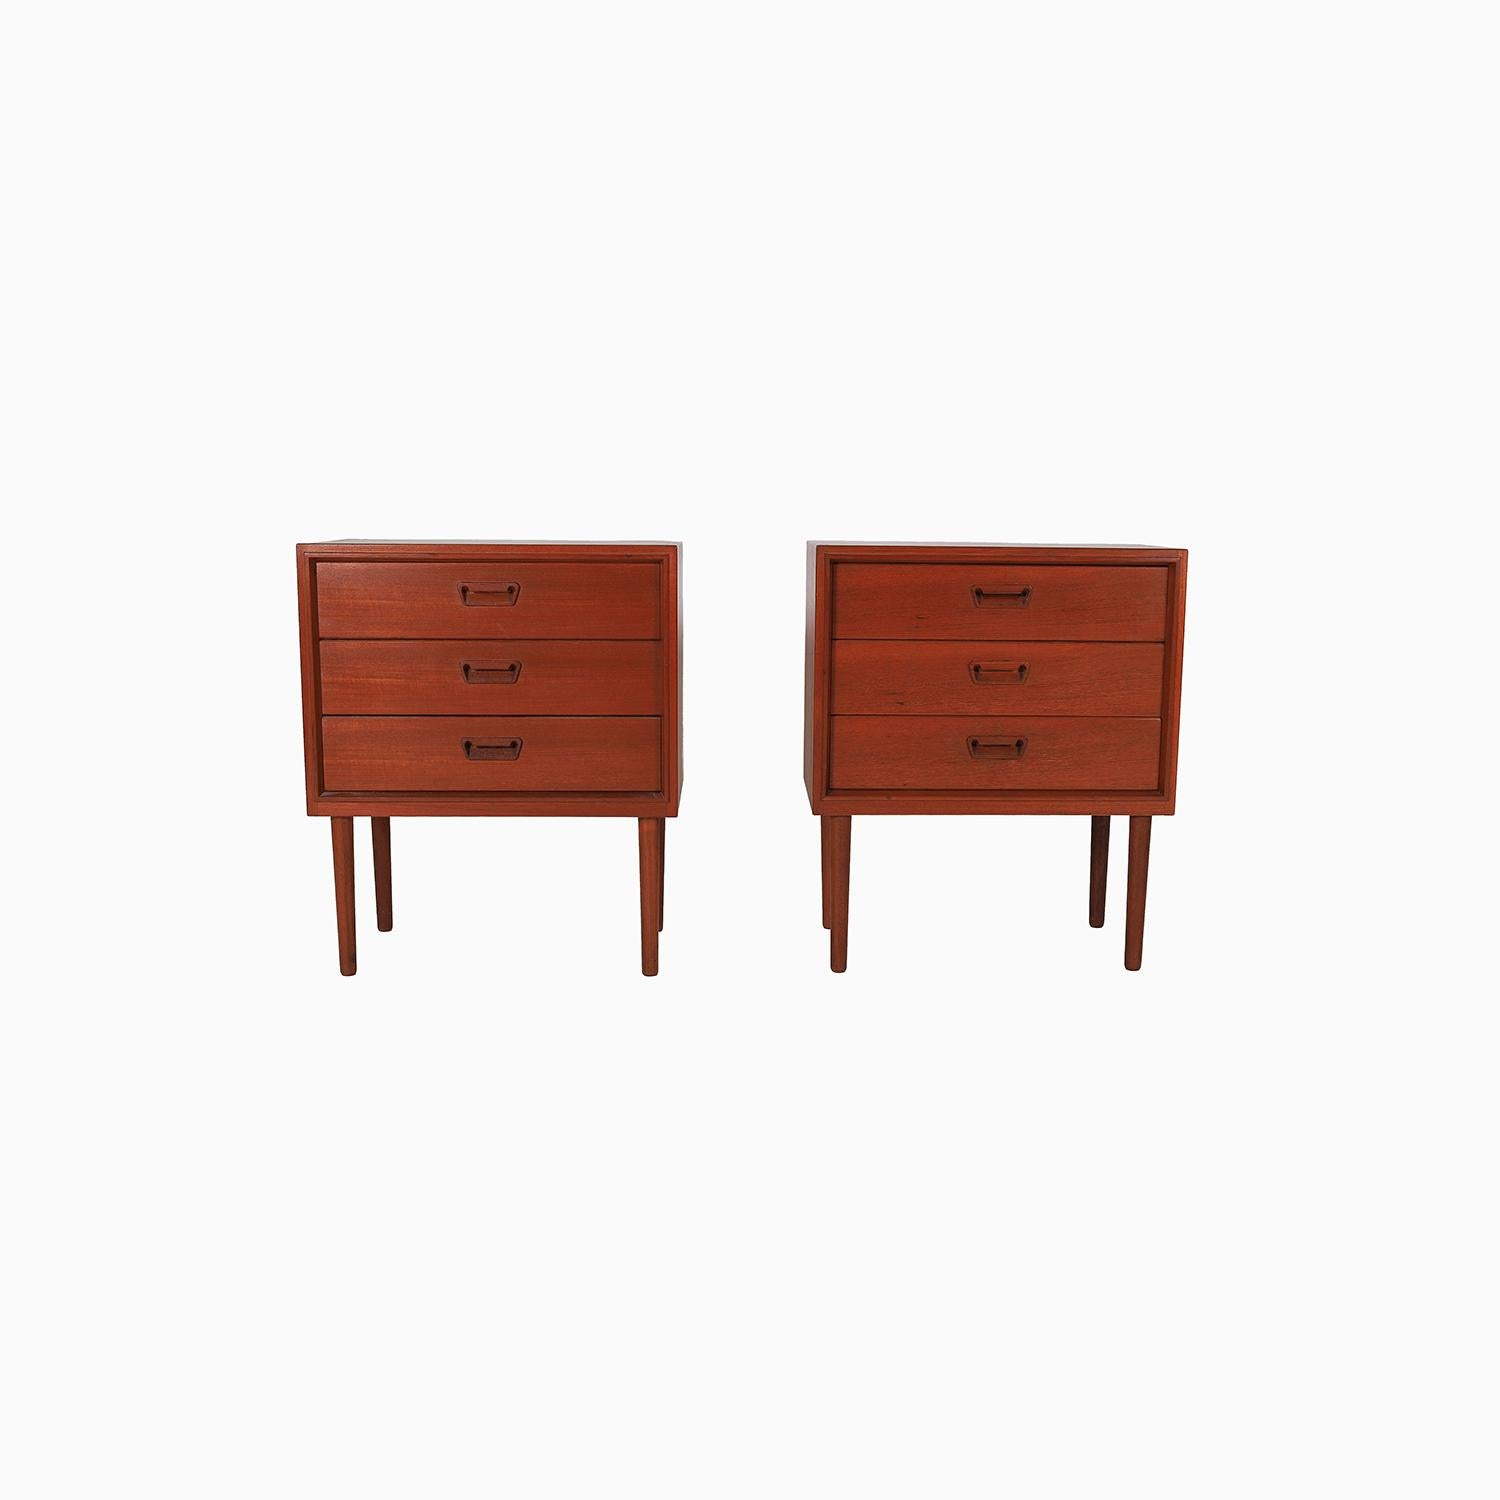 A perfect scaled danish modern small occasional chest manufactured by Munch Slagelse. This would work great in many different settings. We envisioned them perfectly fitting as bed side storage pieces. Only one available. price is per